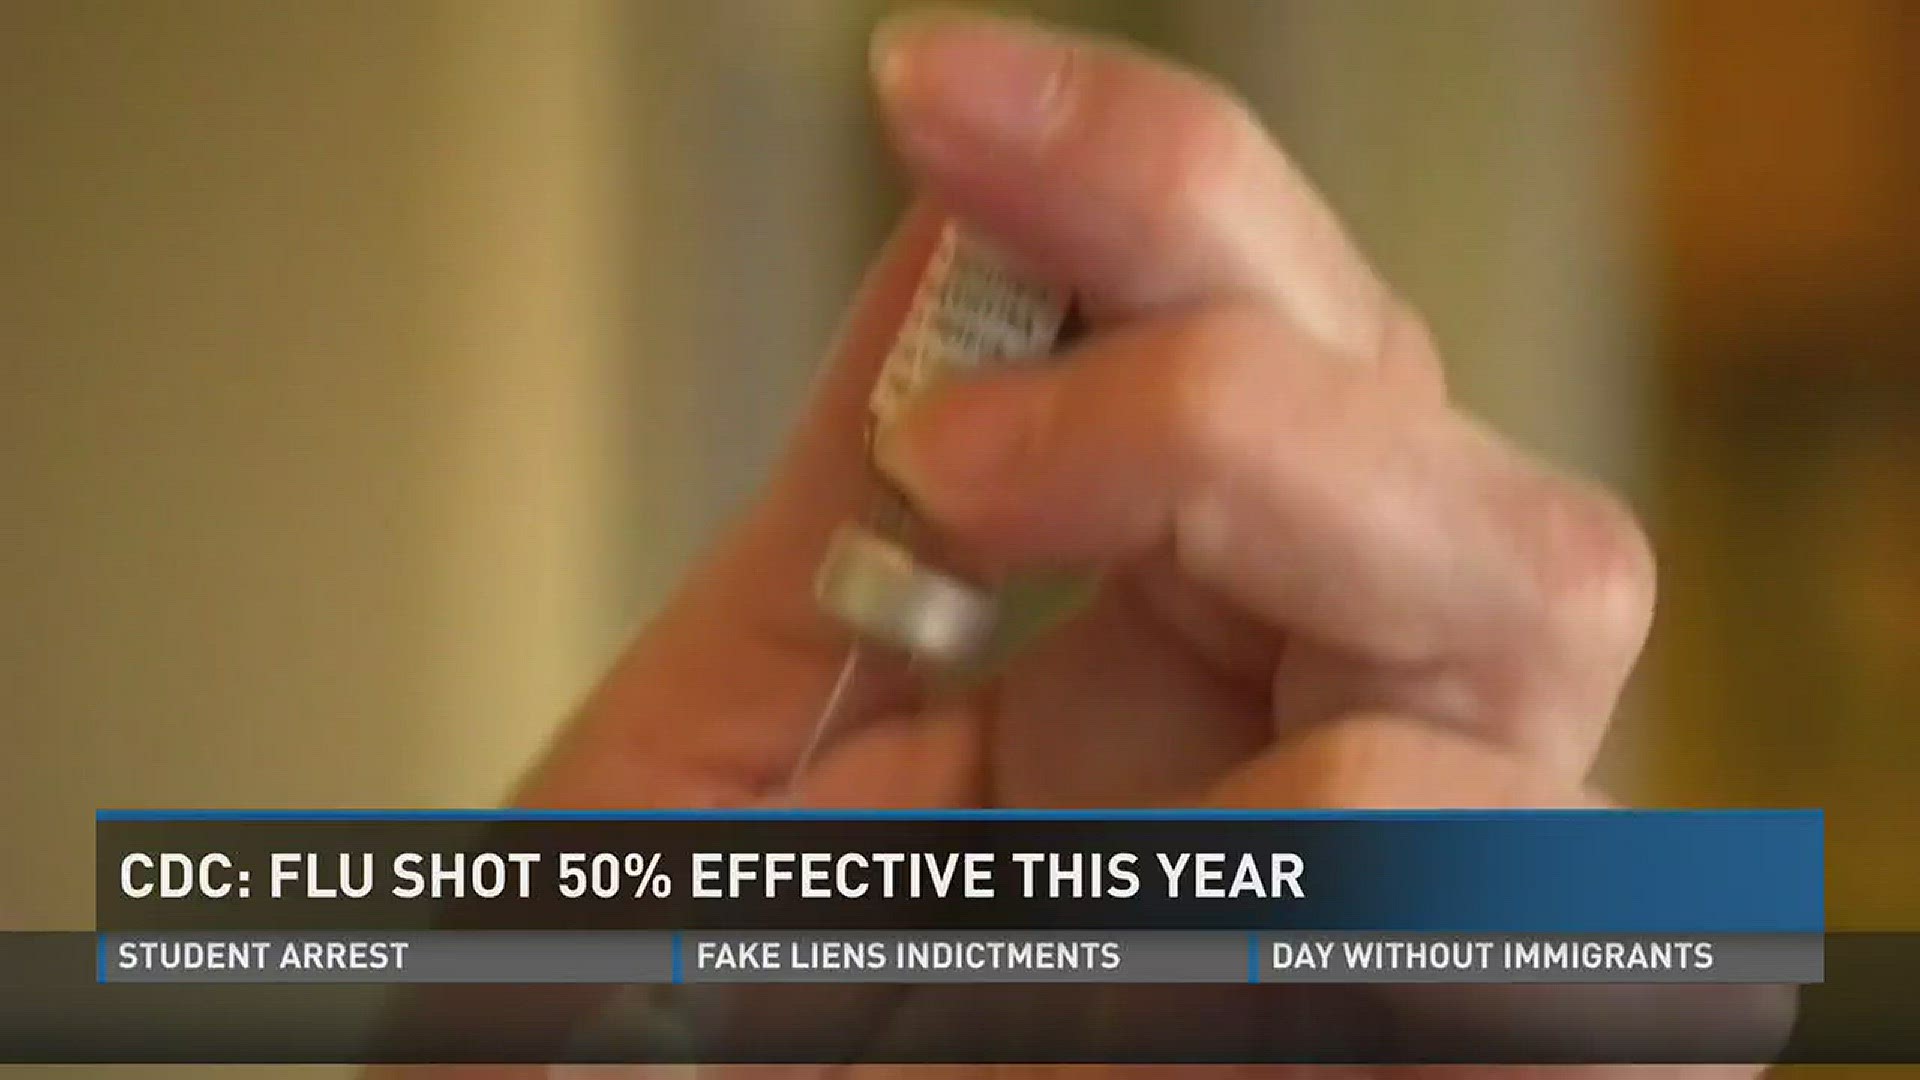 Feb. 16, 2017: The CDC says this year's flu shot is nearly 50 percent effective.